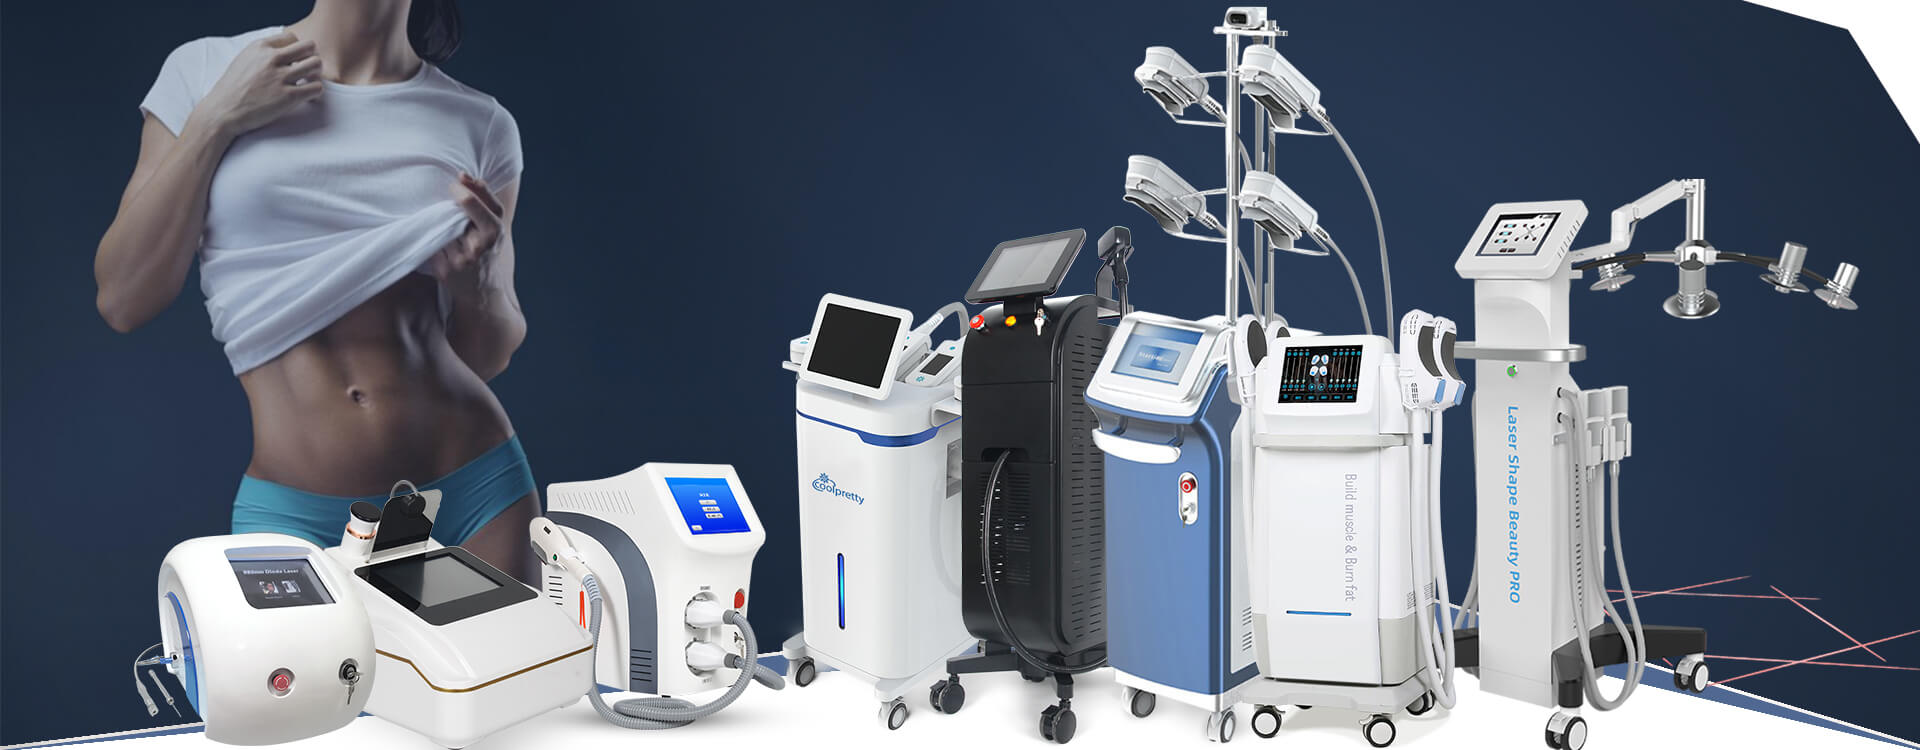 https://www.prettylasers.com/wp-content/uploads/2023/02/PRETTYLASERS-manufacturer-medical-aesthetic-machines.jpg